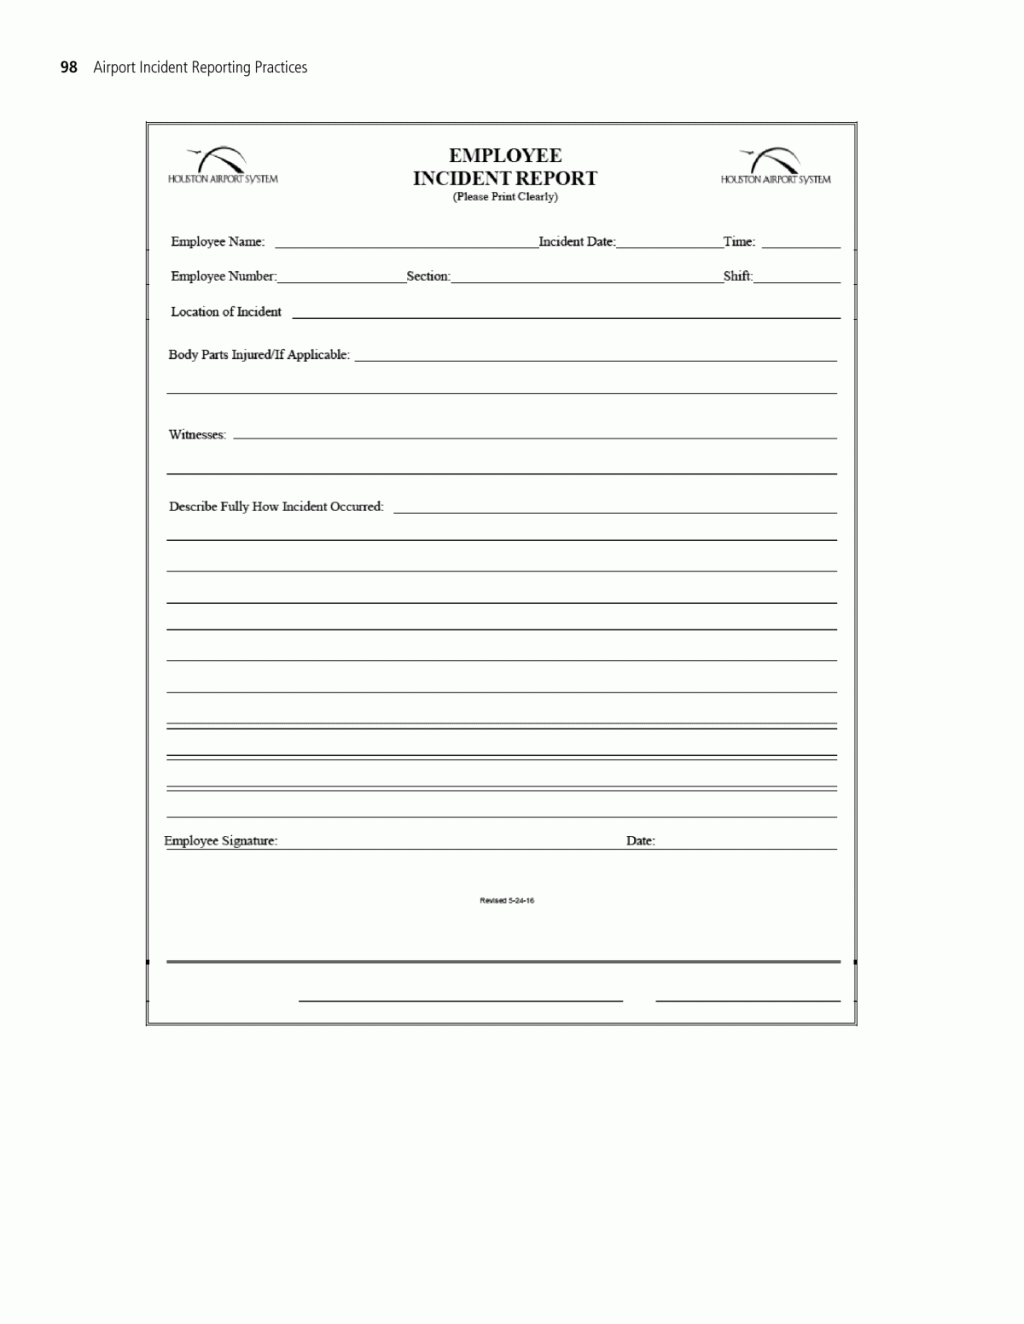 Incident Report Form Template Microsoft Excel Templates For Customer Incident Report Form Template